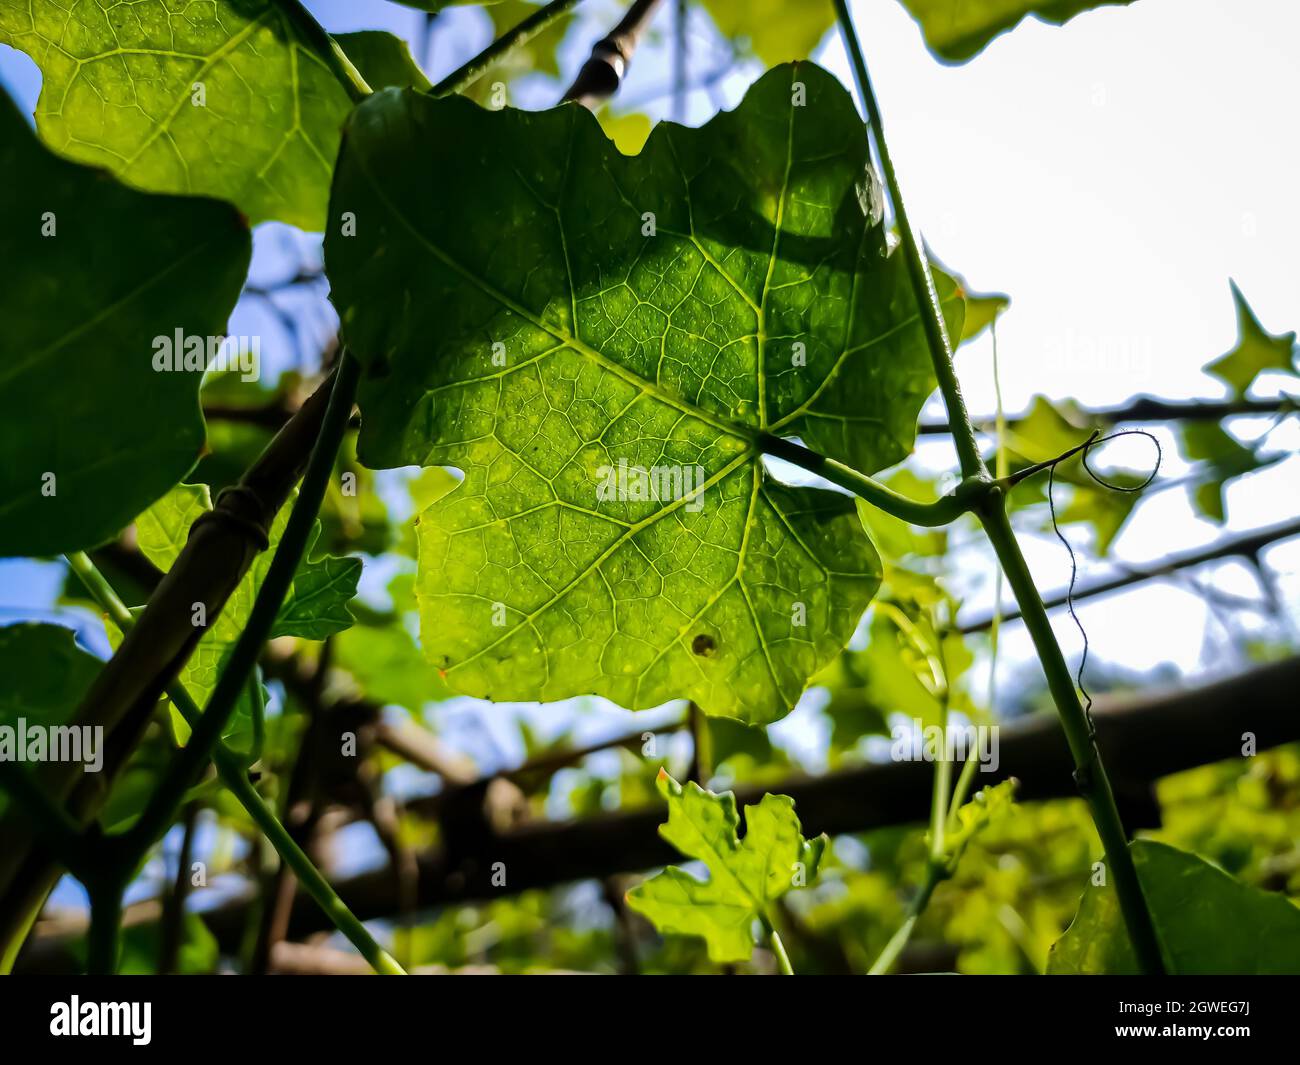 Morning Sunlight Lighted Some Ivy Gourd Leaf Close Up Shot In The